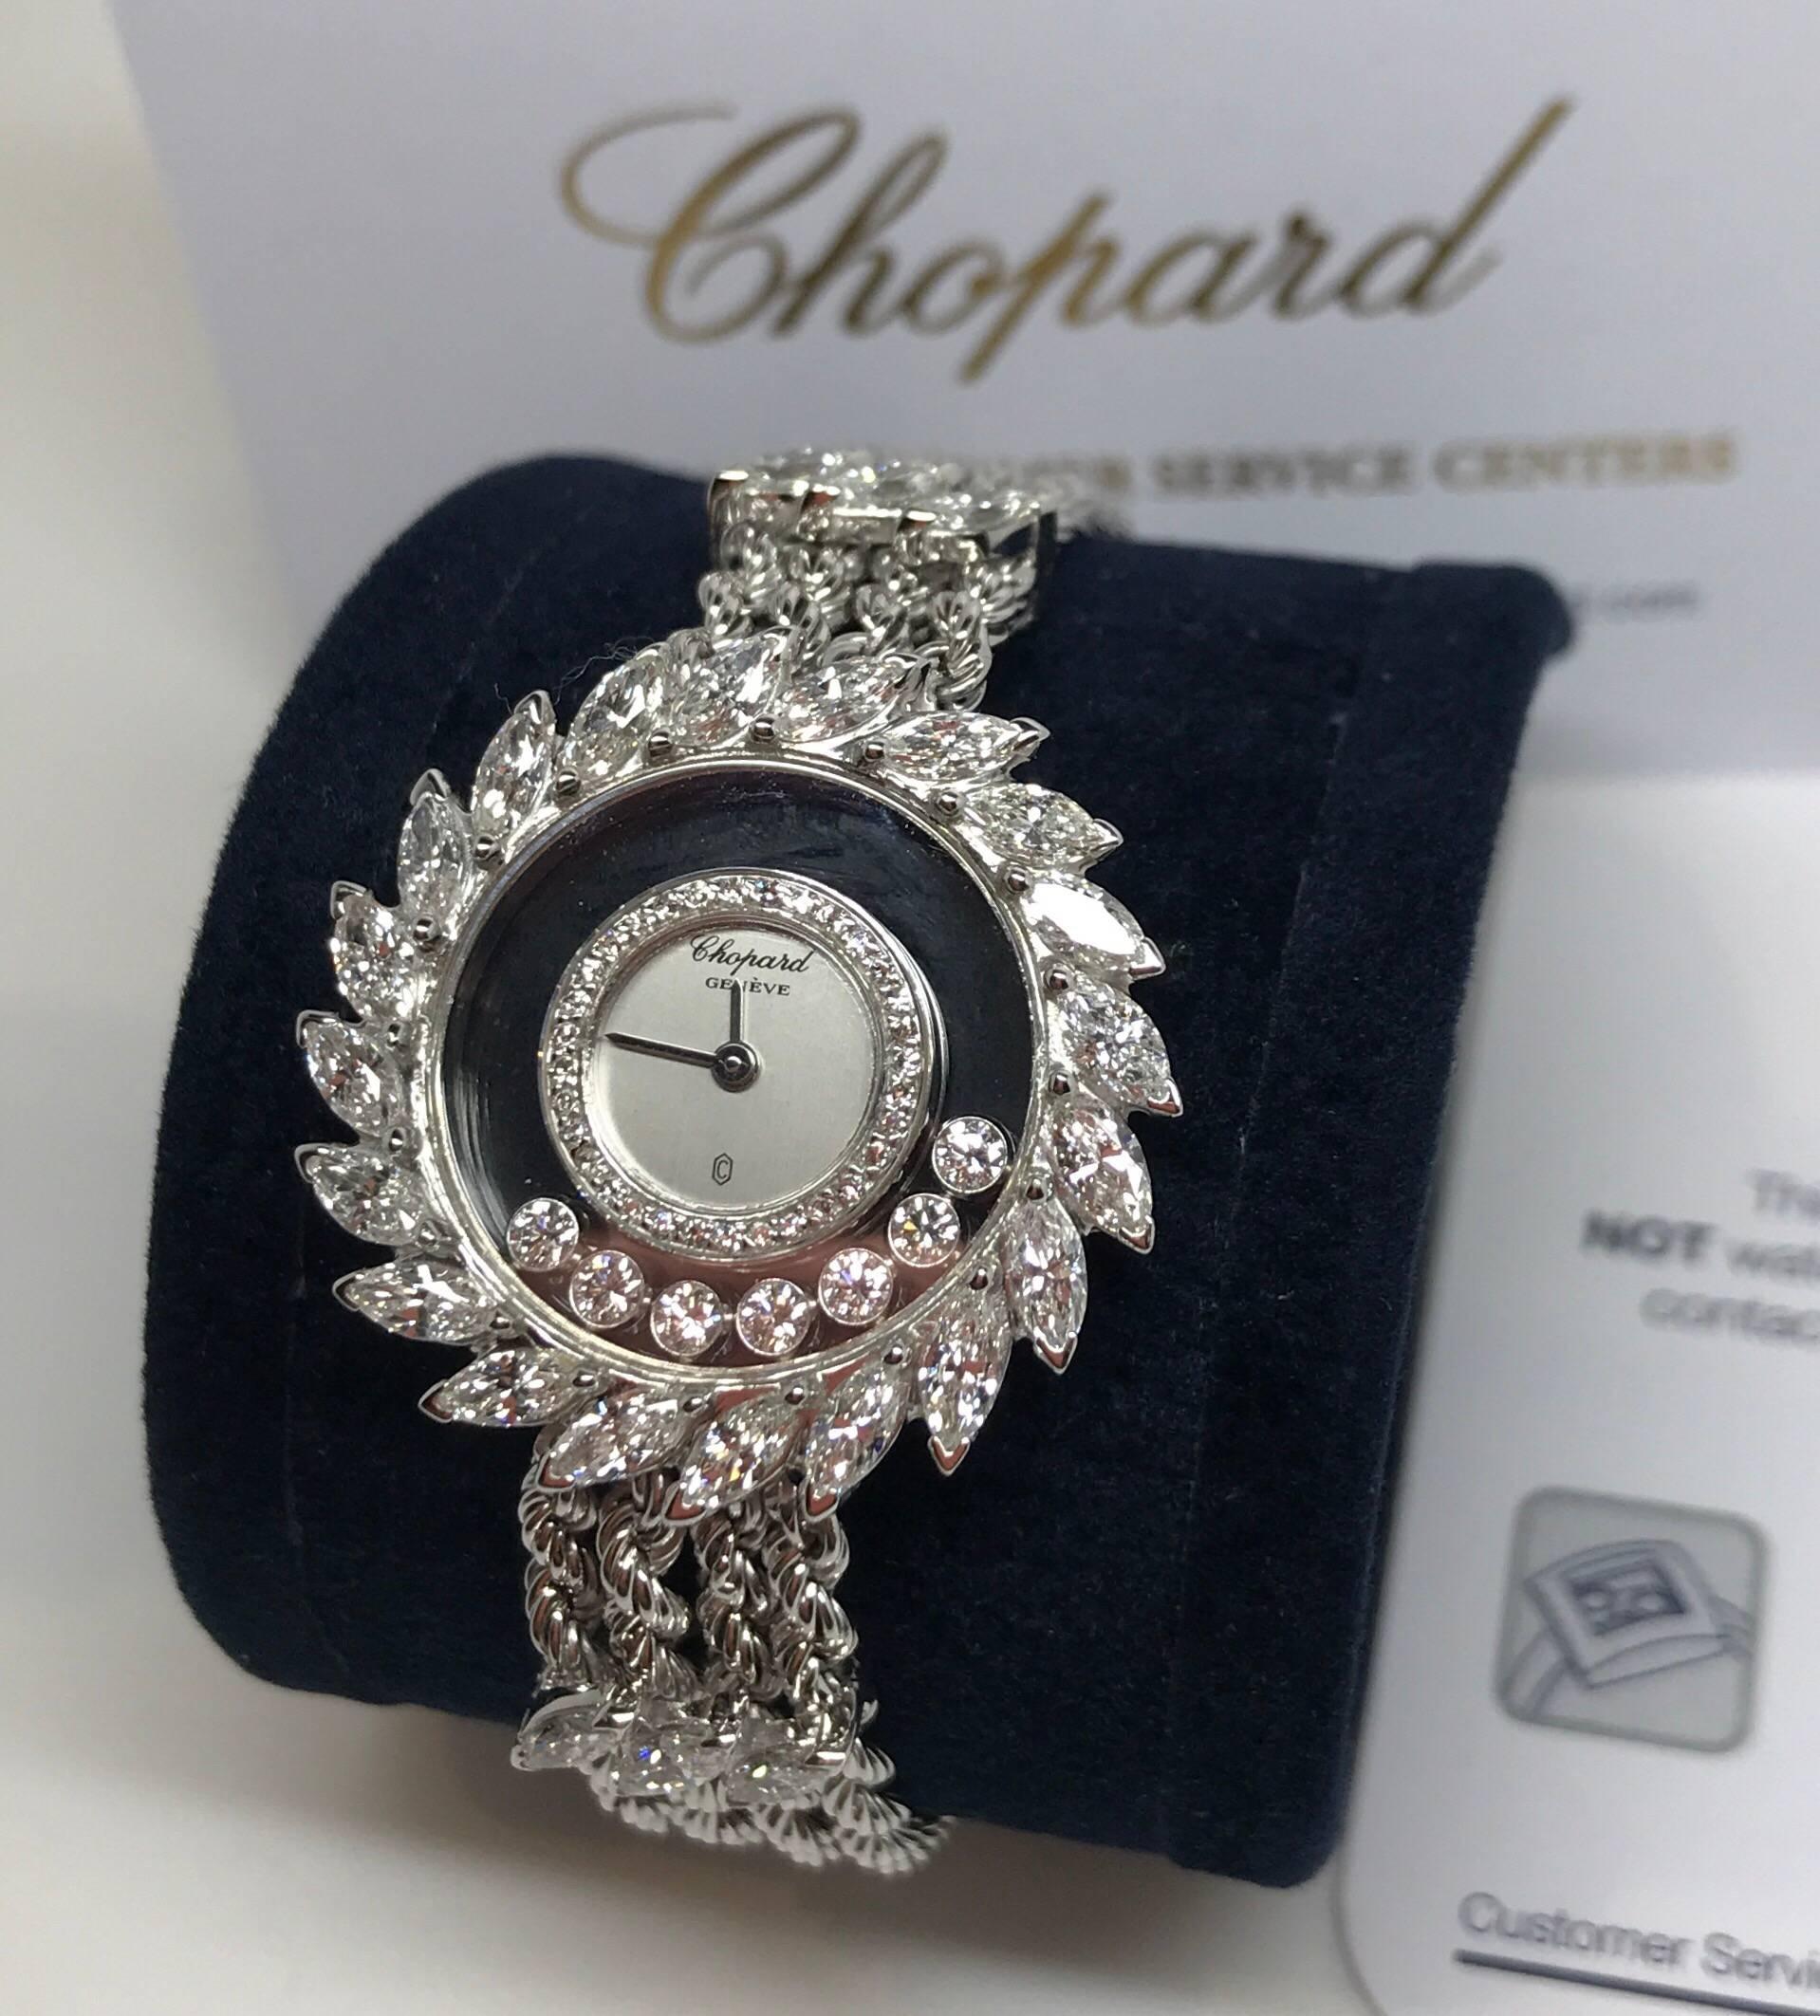 A Chopard Happy Diamonds Ladies luxury watch set in 18k white gold. The watch features a silvered dial with 32 diamond-set inner bezel of approx 1 carat and set within two scratch-resistant sapphire crystal plates containing seven white gold-mounted